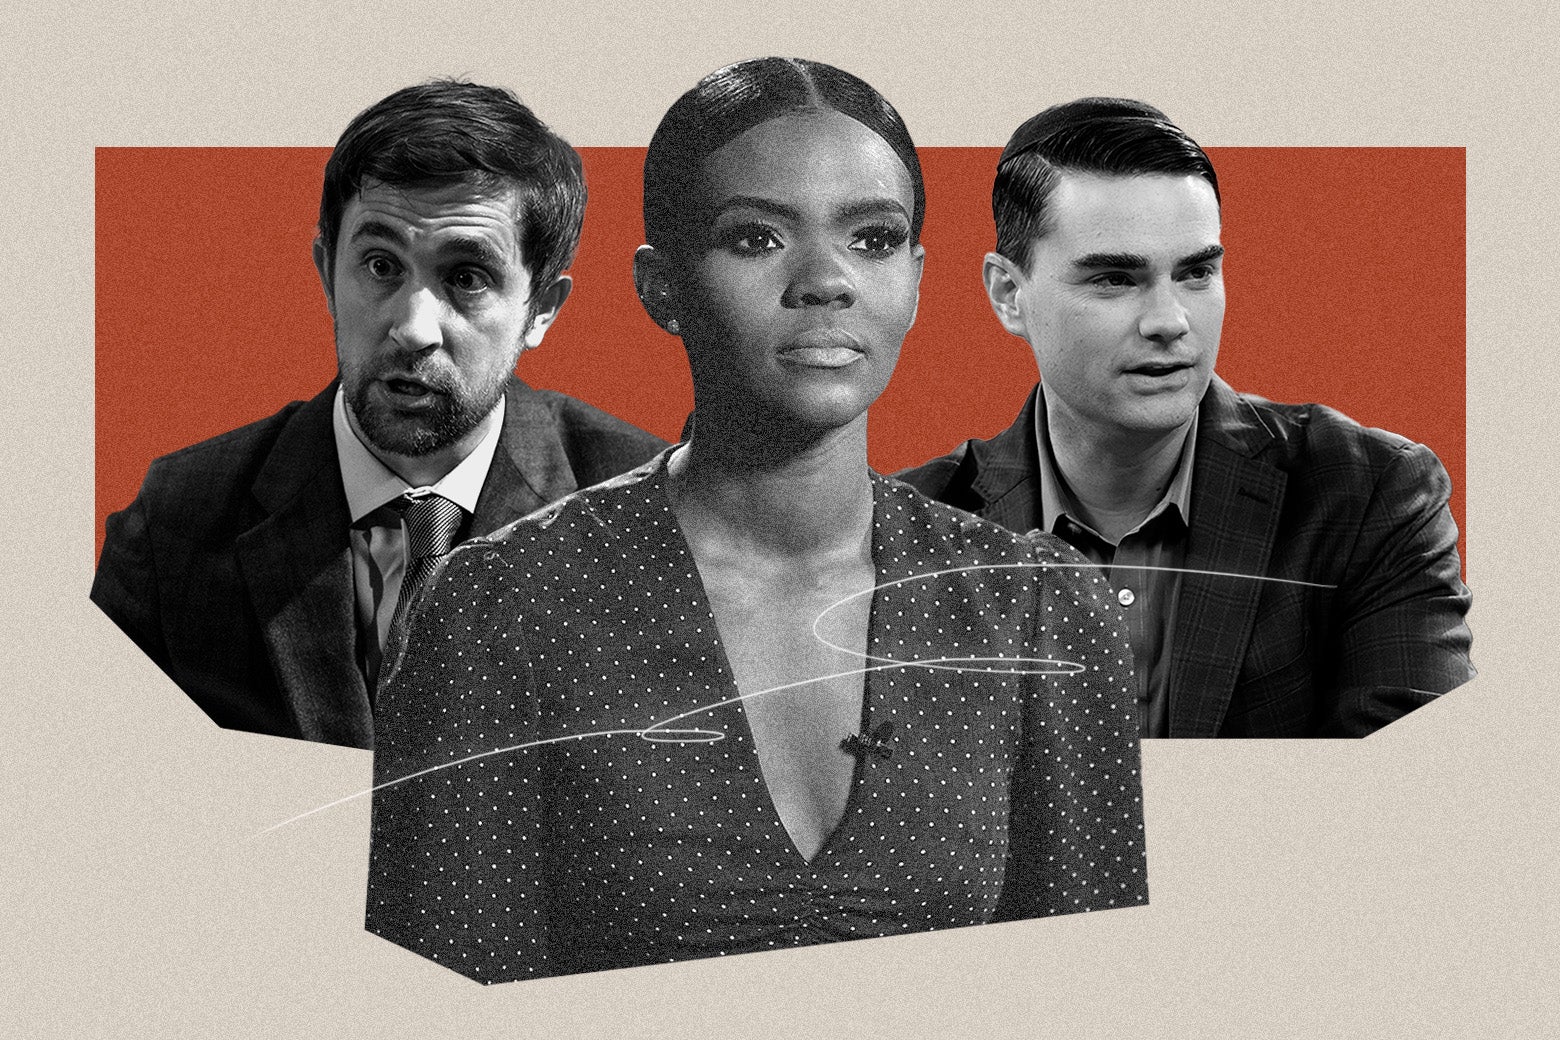 Christopher Rufo, Candace Owens, and Ben Shapiro.